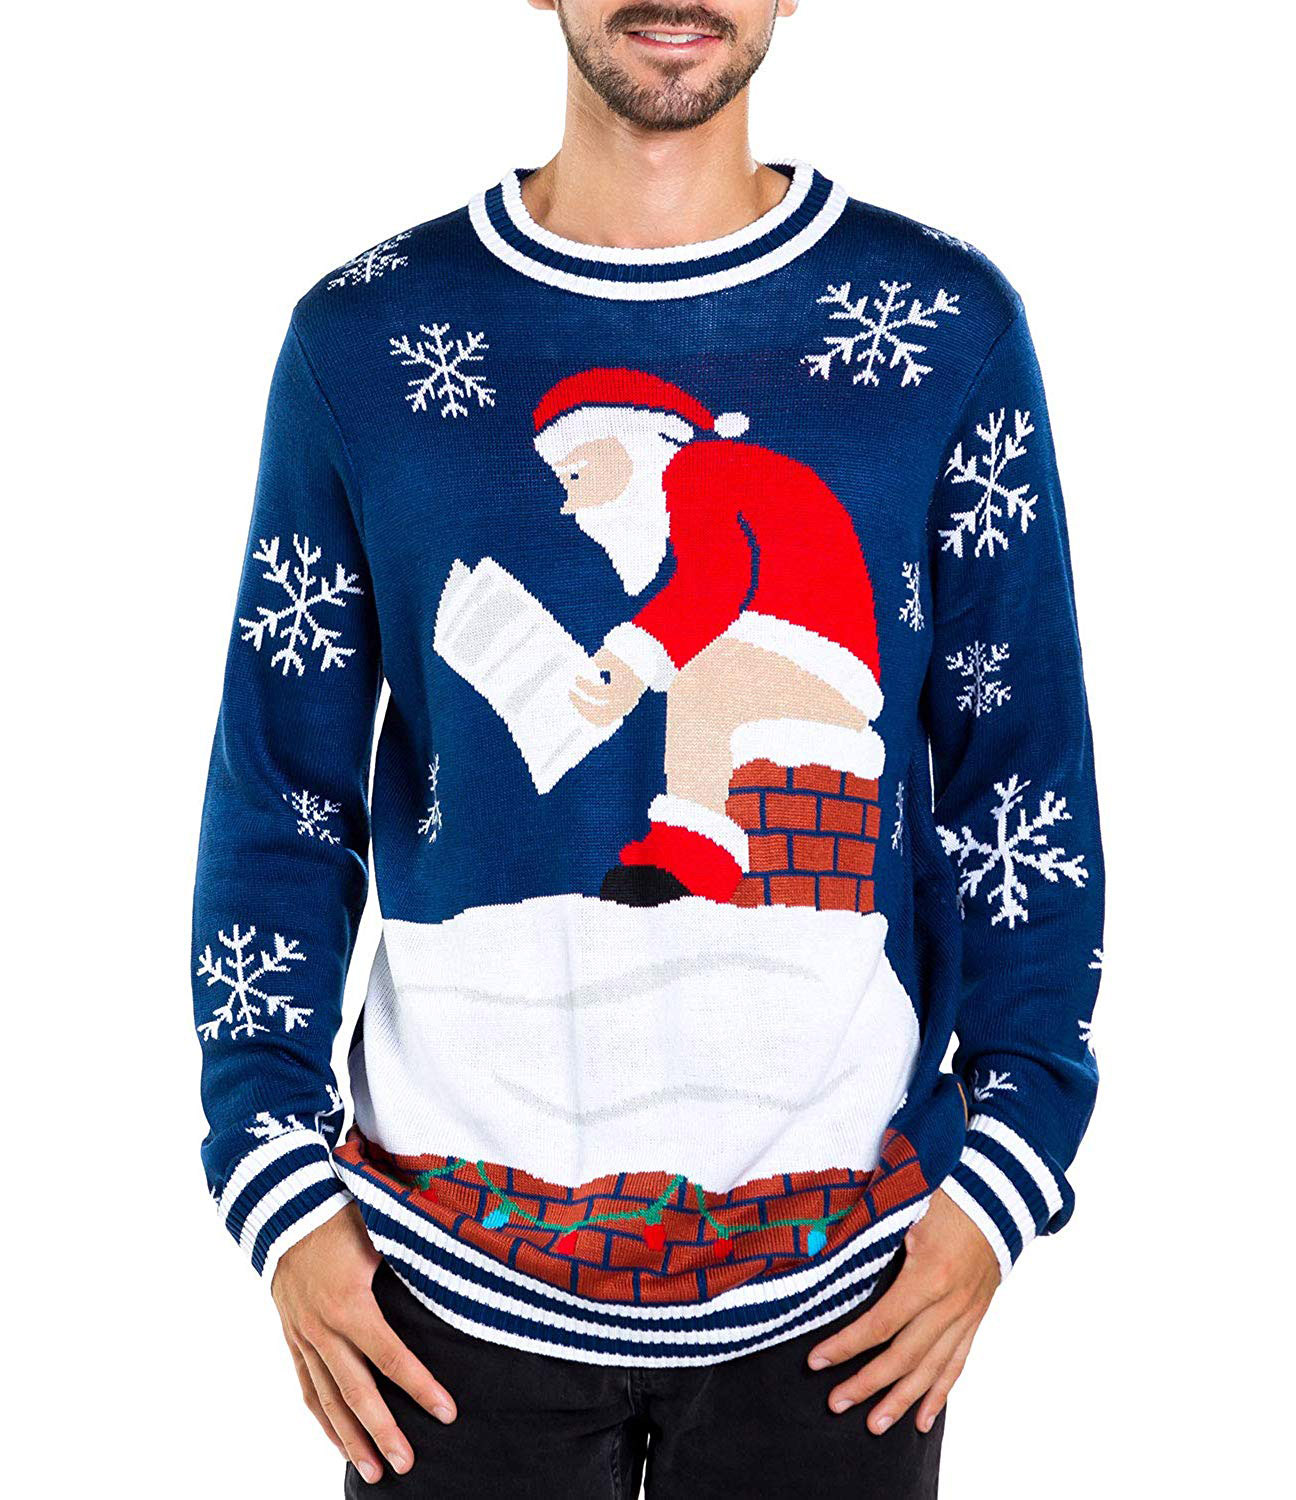 The 19 Best Ugly Christmas Sweaters For 2019: Deez Nuts, Human ...